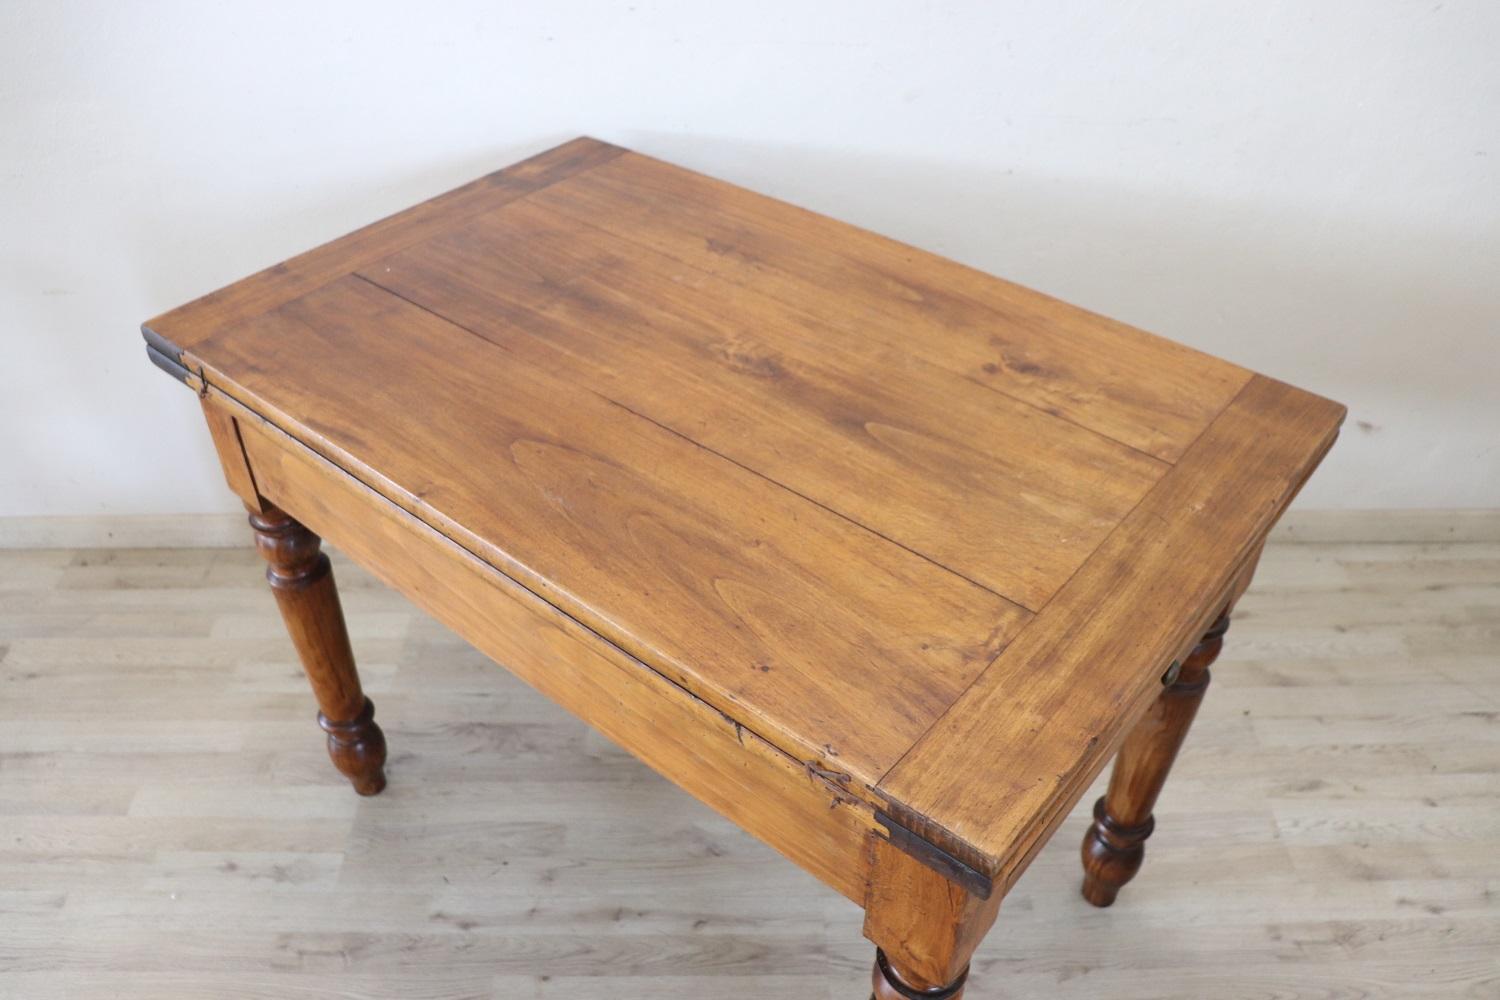 Beautiful very nice Italian solid poplar wood kitchen table, 1850s. The table is very simple and linear, characterized by solid turned legs. Equipped with a drawer and a practical internal compartment. The top of this table opens like a book page